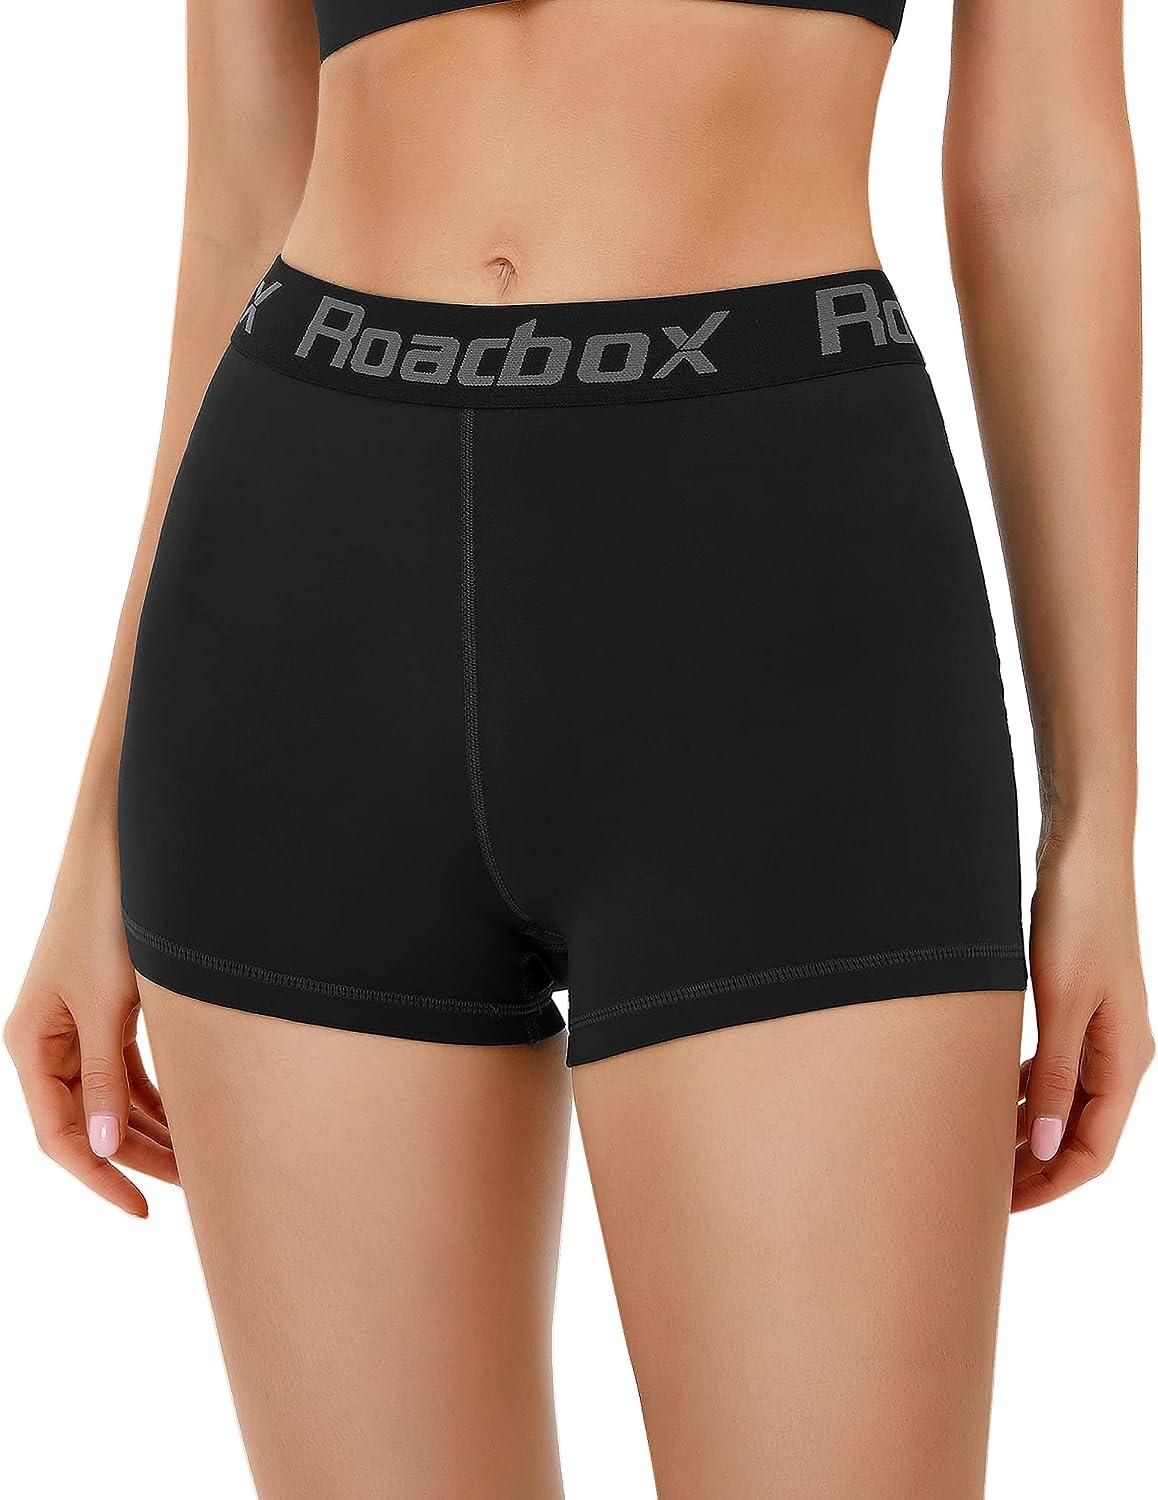 Roadbox Compression Shorts Women 3/5 Volleyball Shorts with  Pocket/Non-Pocket Cool Dry for Running Workout Yoga Swimming  Black+black+black Medium